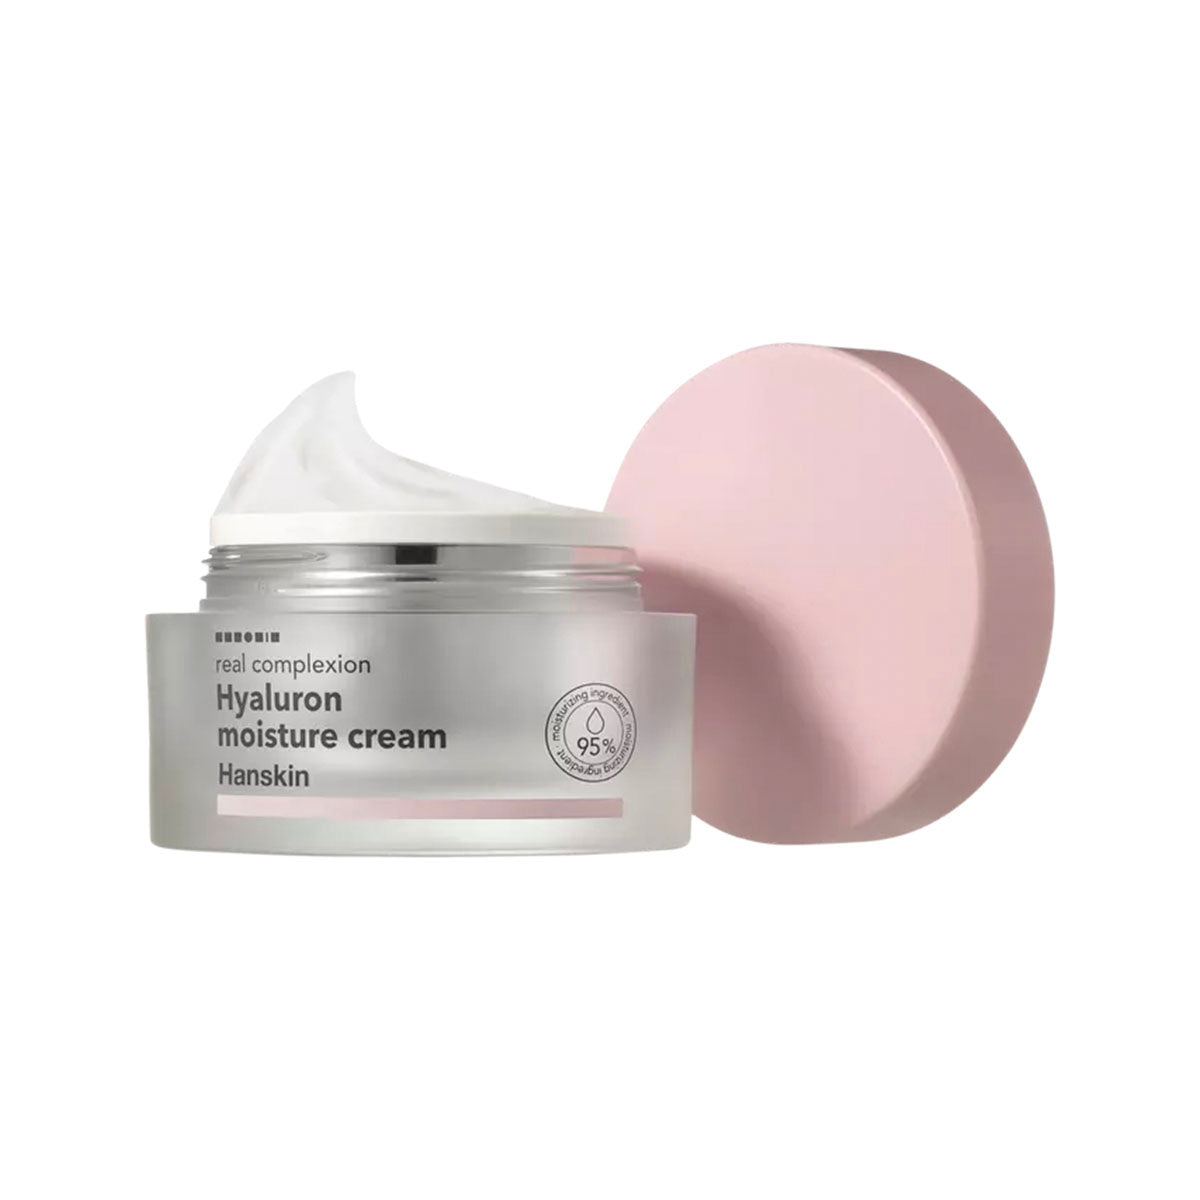 Real Complexion Hyaluron Moisture Cream opened